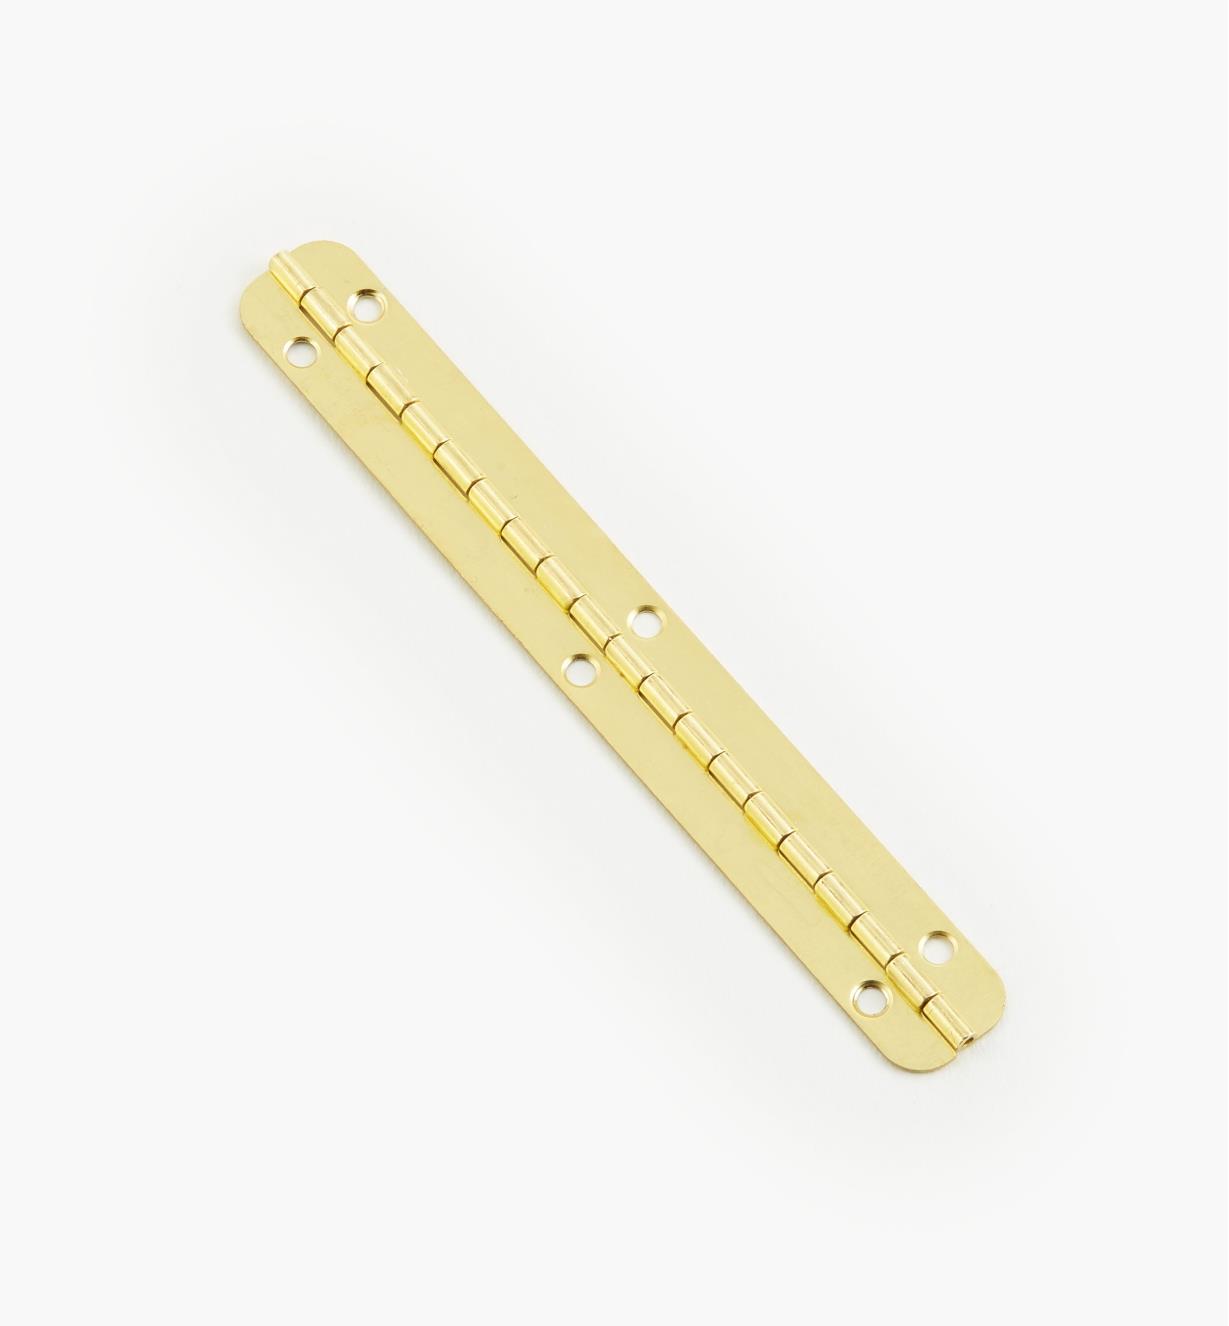 00D8064 - 98mm x 12mm RE Sm. Brass Piano Hinge, ea.